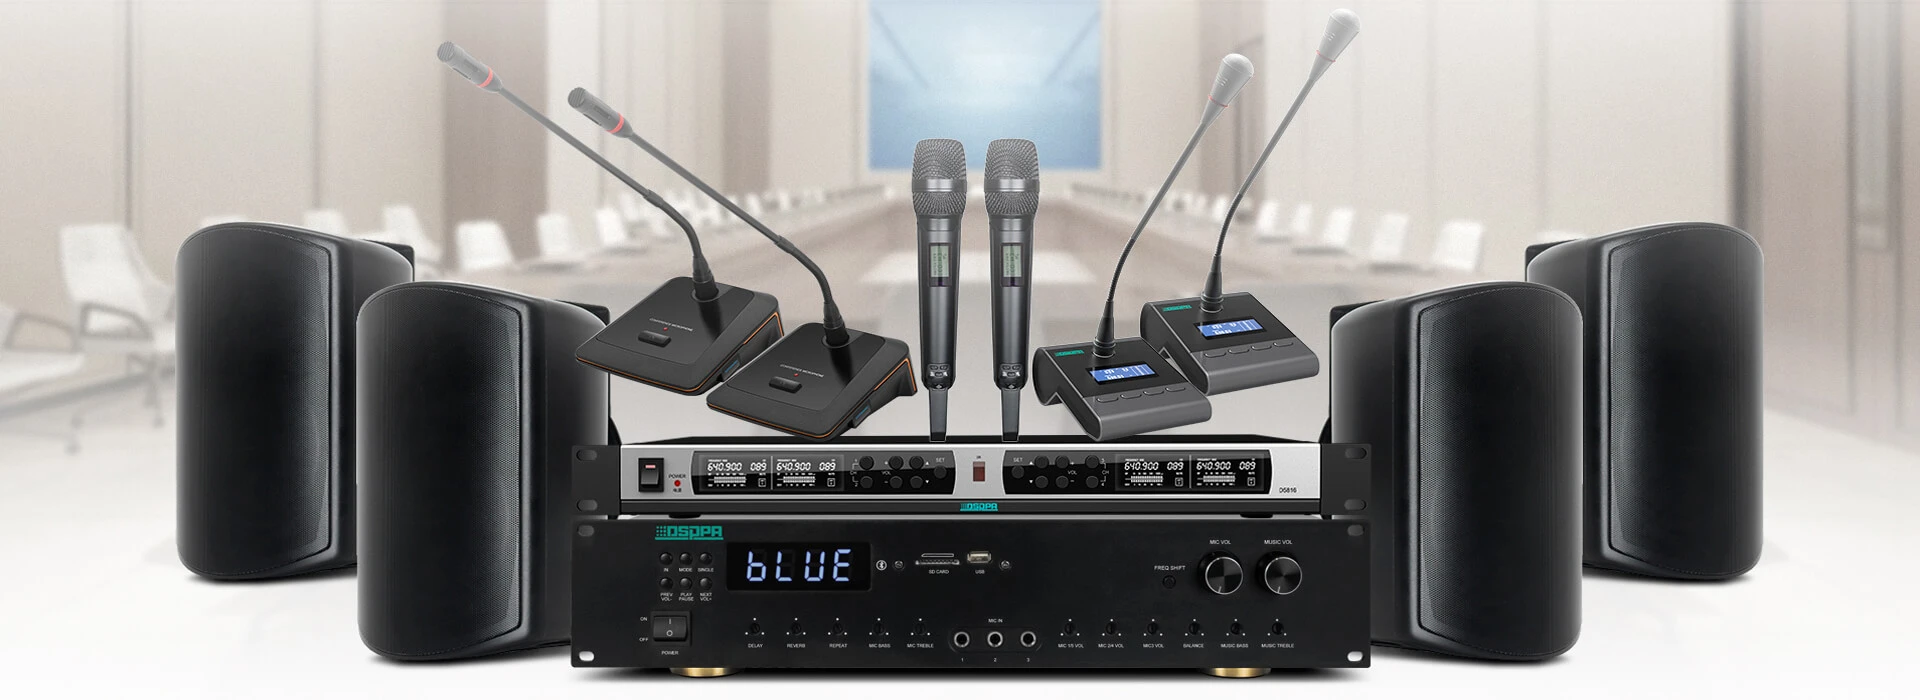 Economic Audio Conference System for Station's Conference Room